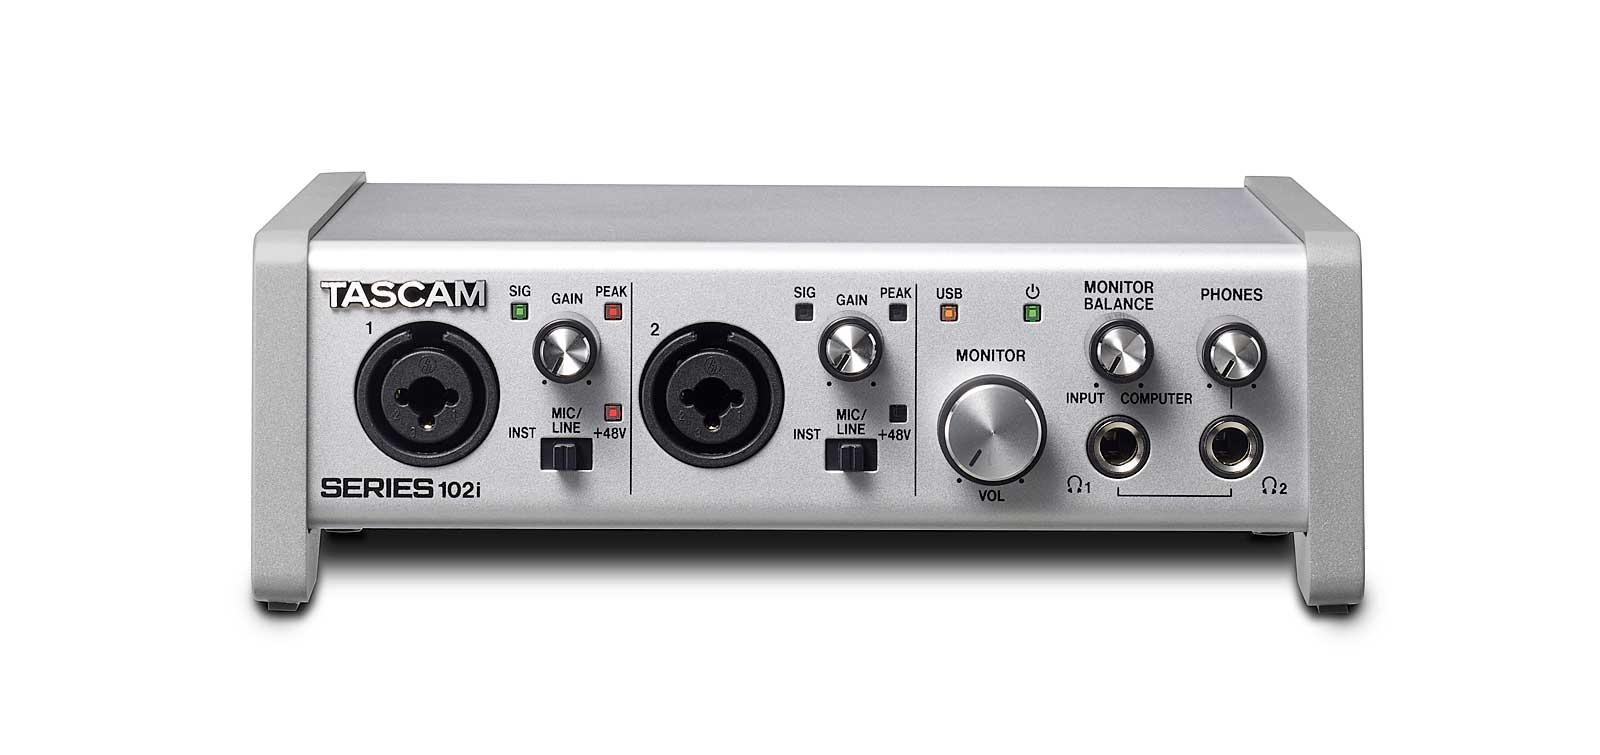 Tascam SERIES 102i USB Audio/MIDI Interface With DSP Mixer (10 in 